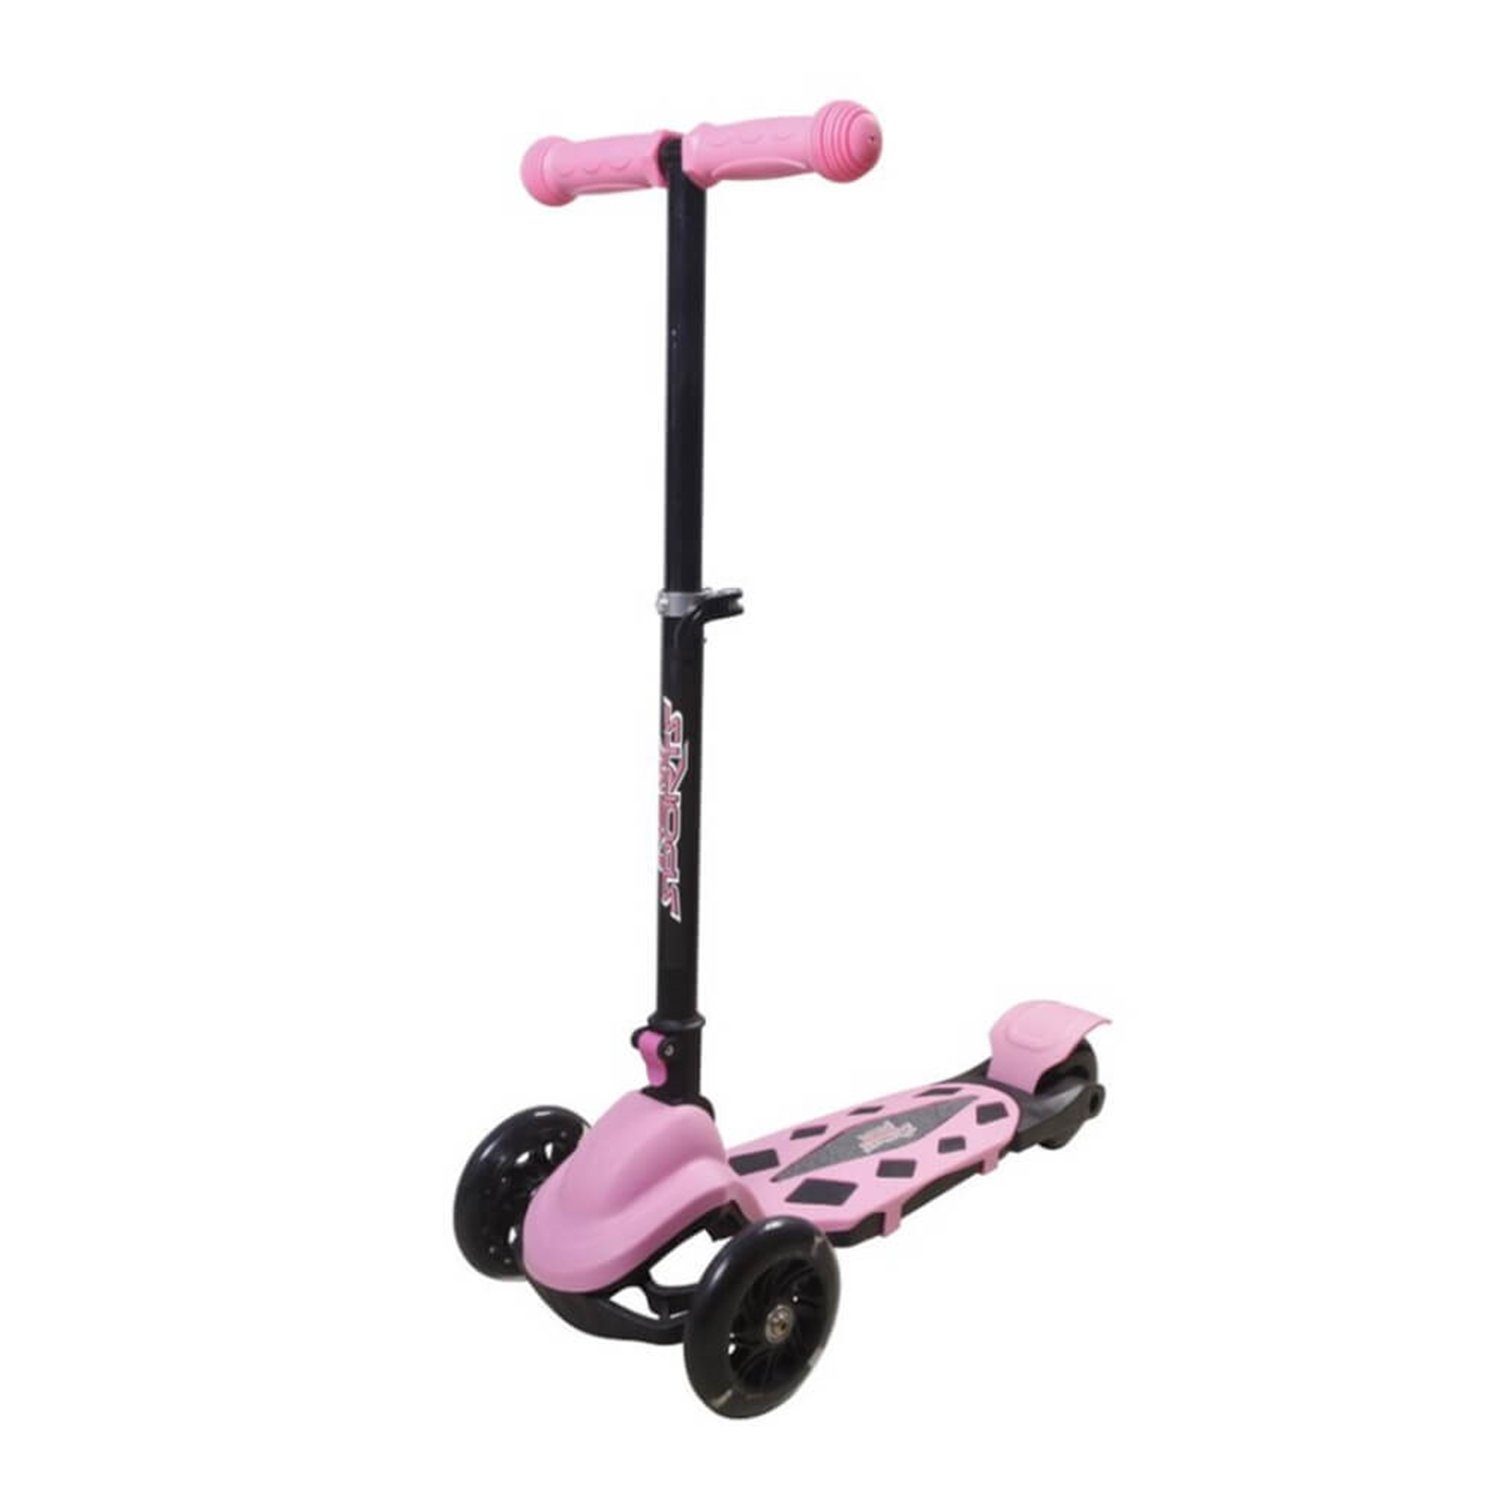 New Scooter Sports Rosa, 110 Vedes Scooter mm 73422019 klappbar, 3-Wheel